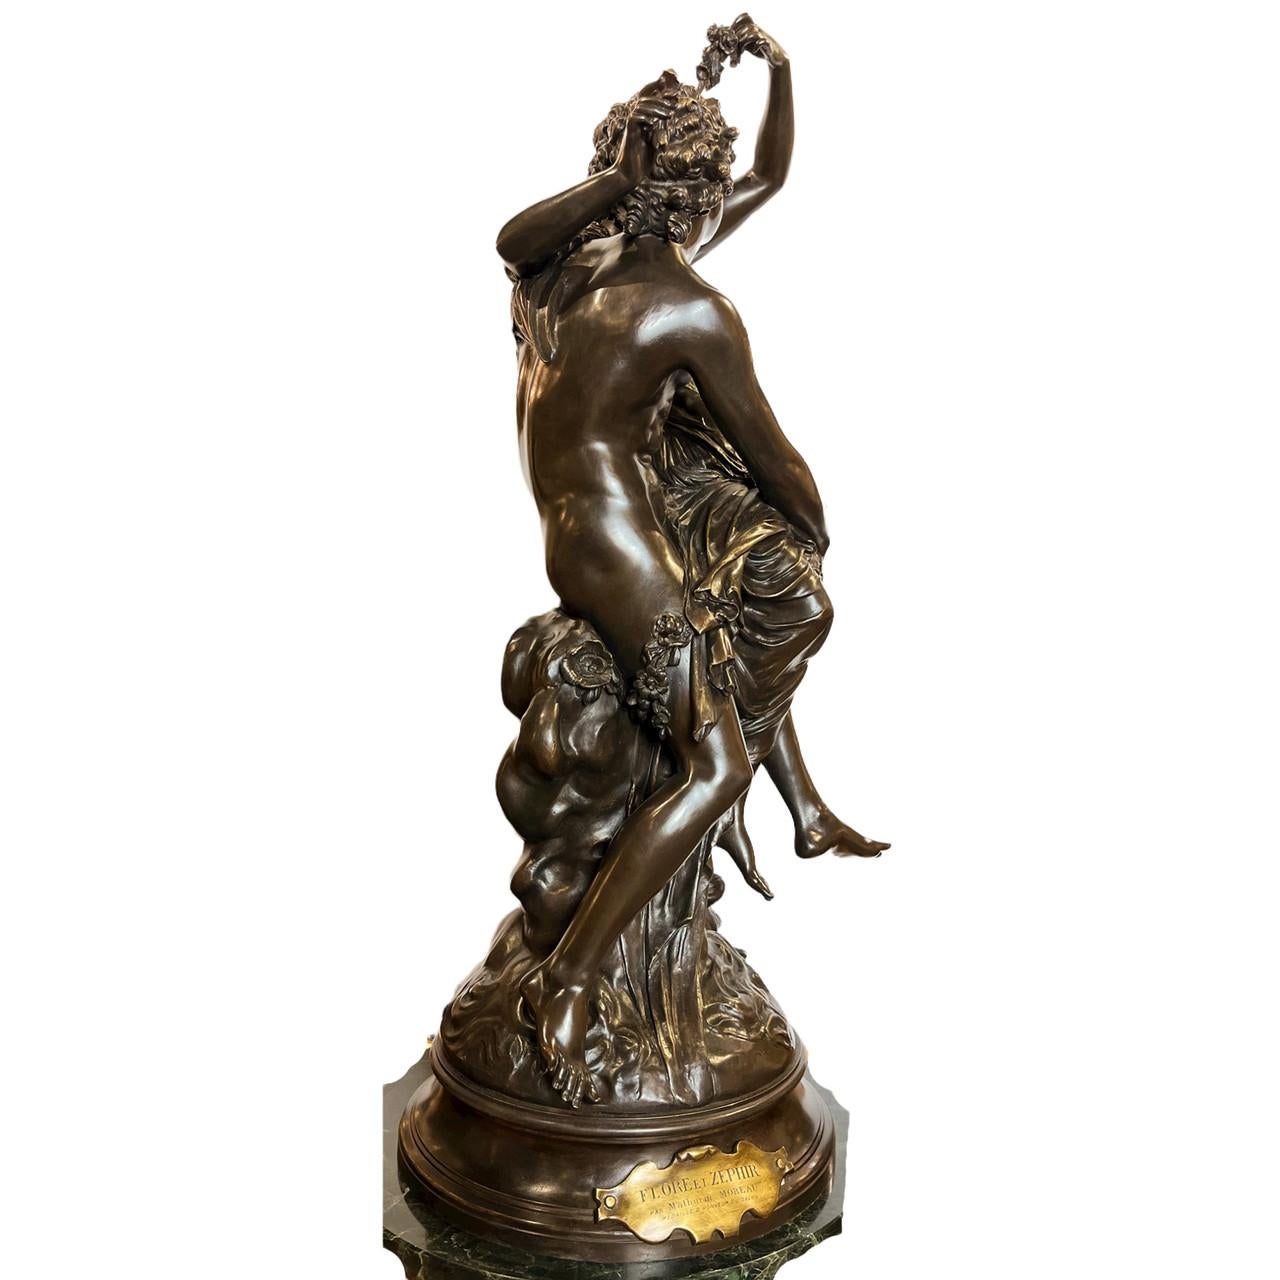 Artist: Mathurin Moreau (FRENCH, 1822-1912)
Medium: bronze, dark brown patina
Dimensions: 33.25 in x 14 in
Signed 'Mthrin Moreau' (to the base), rotating base applied with engrave plaquette 'FLORE ET ZEPHIR / PAR Mathurin MOREAU / MEDAILLE